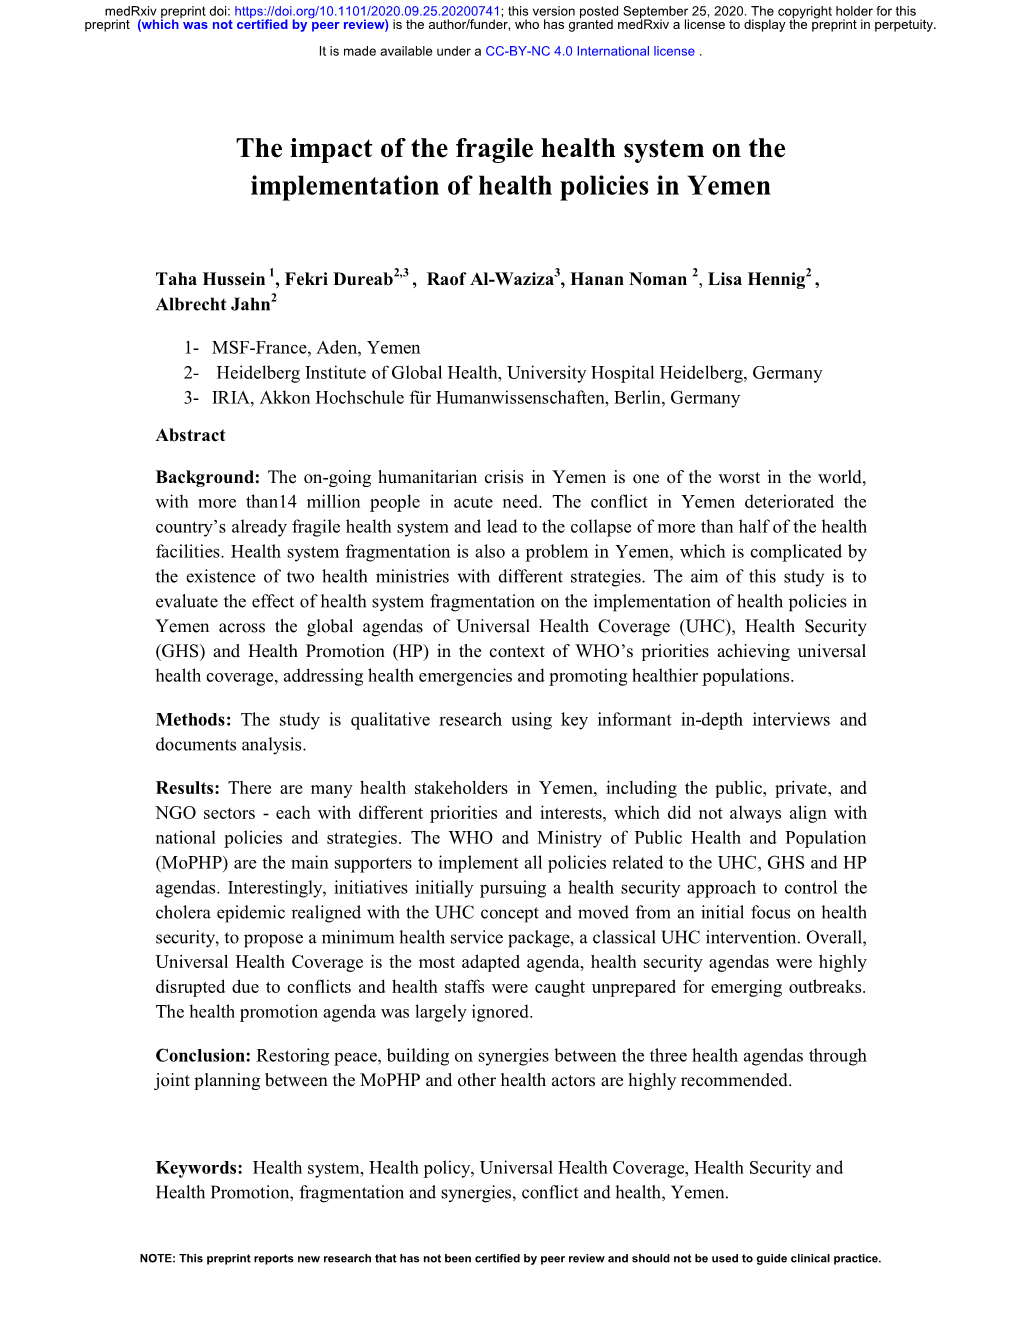 The Impact of the Fragile Health System on the Implementation of Health Policies in Yemen